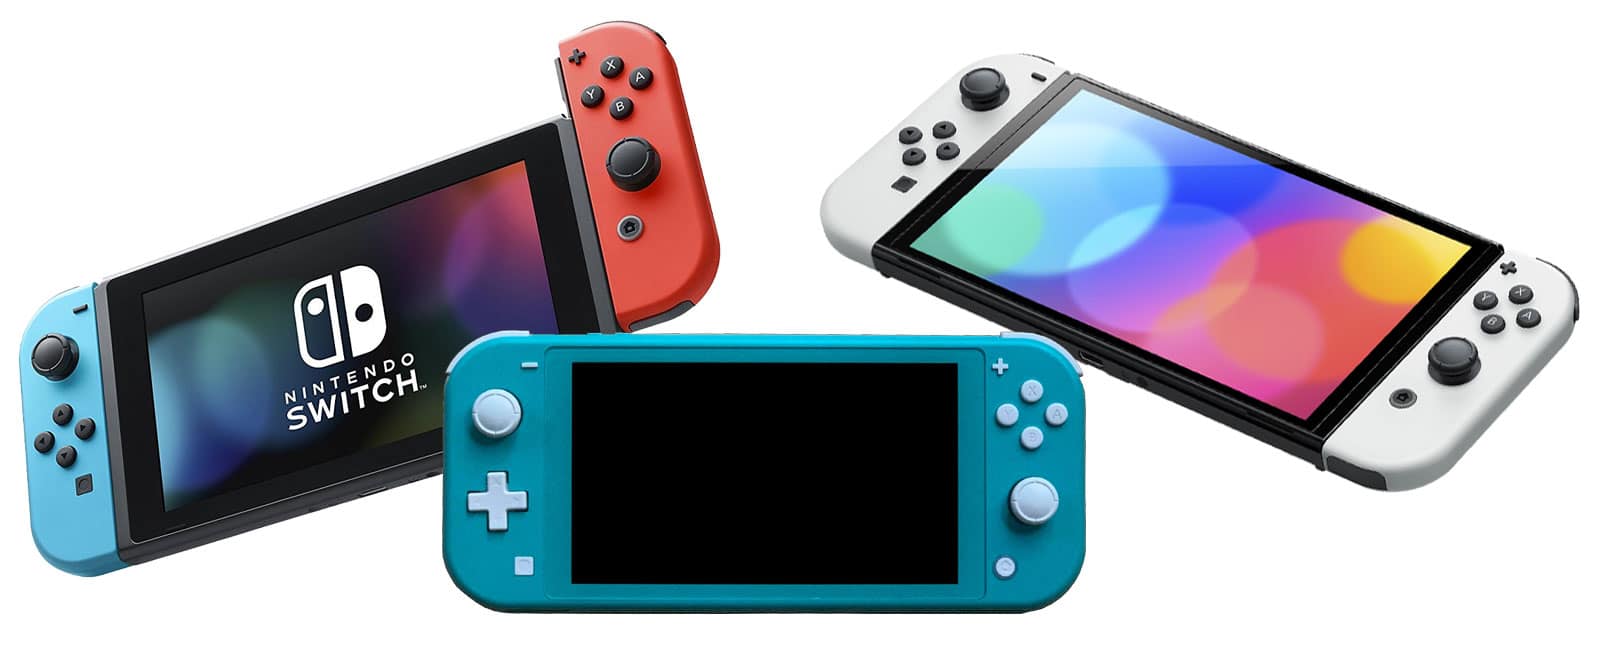 Another Code: Recollection Nintendo Switch, Nintendo Switch – OLED Model, Nintendo  Switch Lite - Best Buy